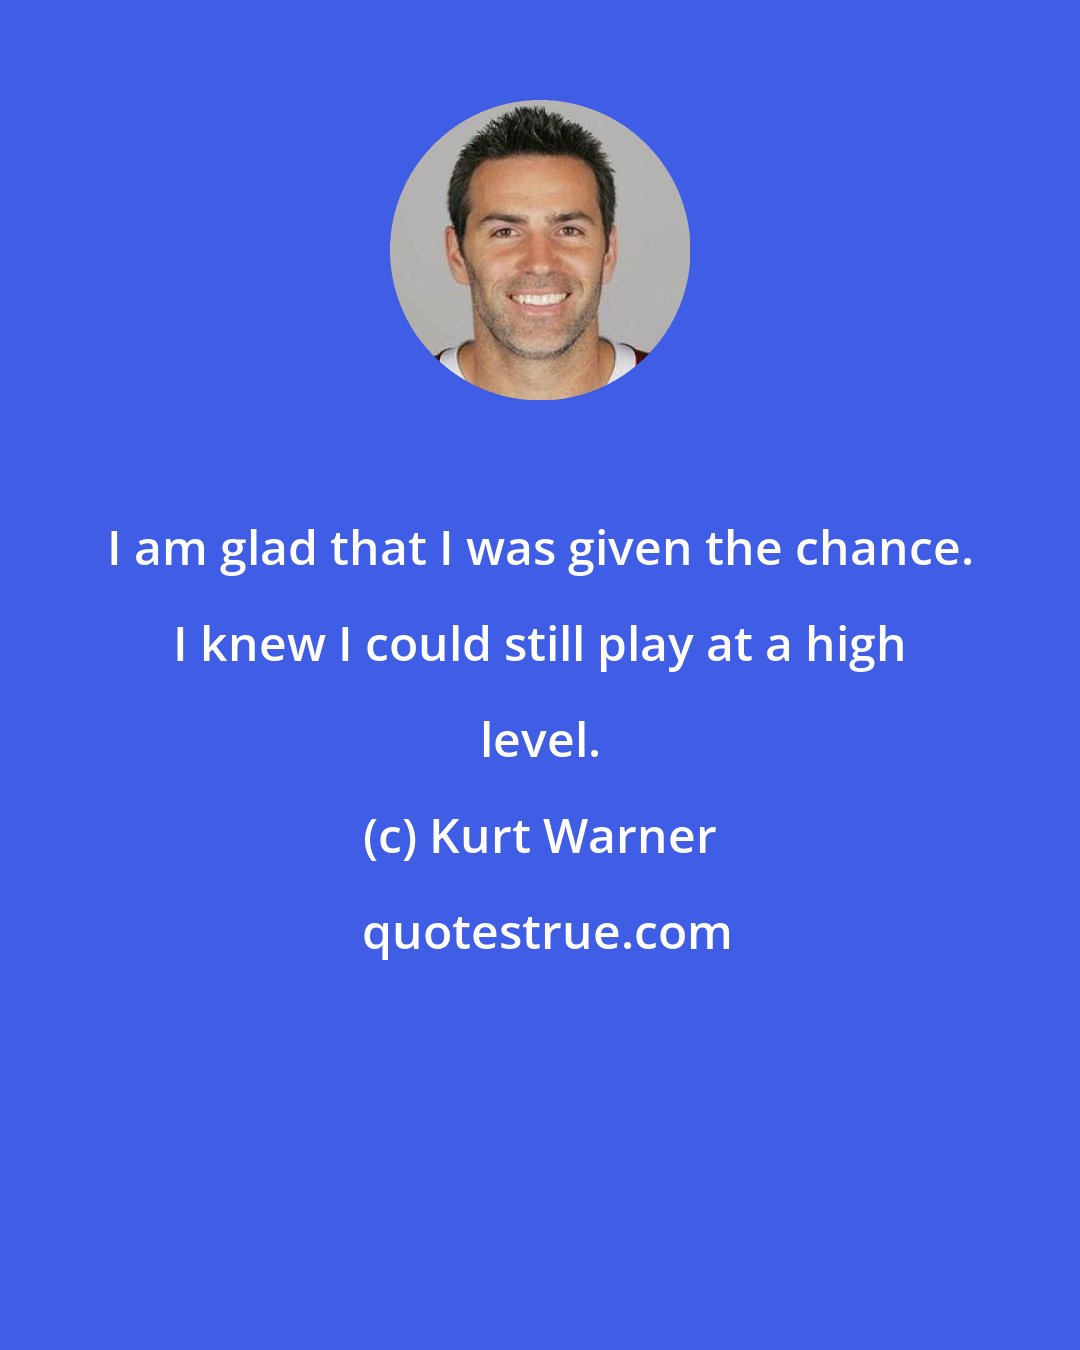 Kurt Warner: I am glad that I was given the chance. I knew I could still play at a high level.